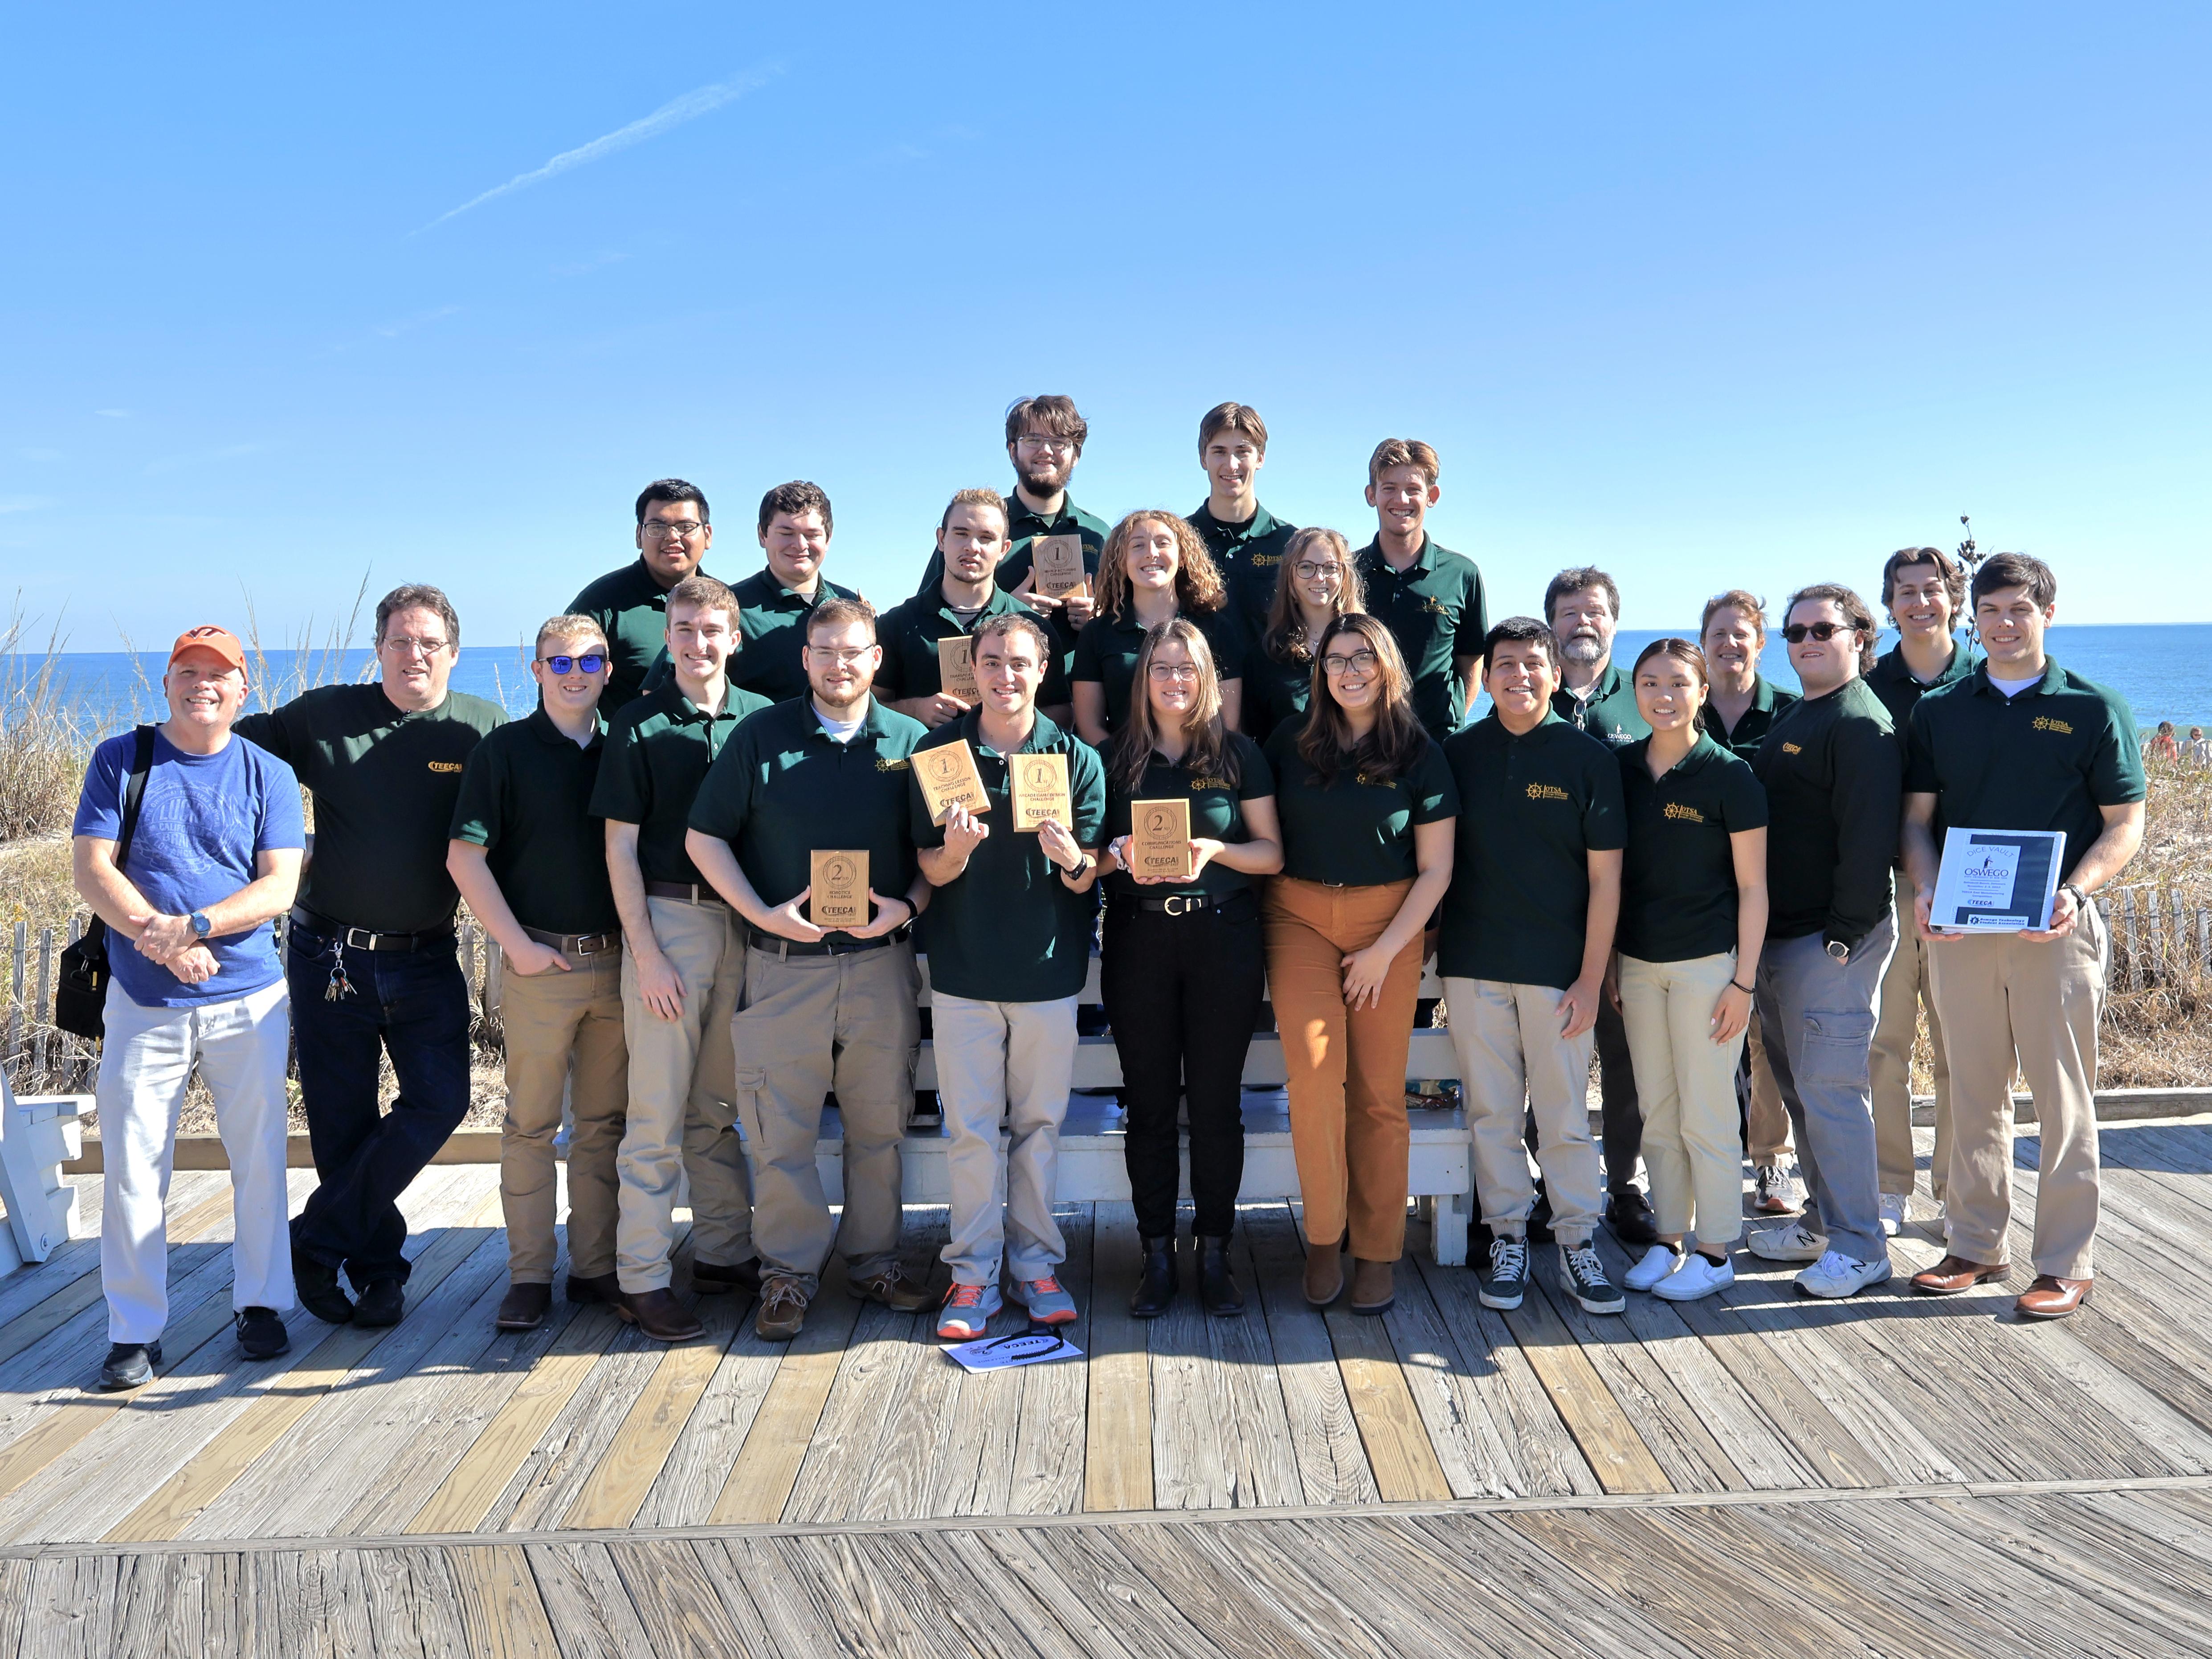 A large and successful turnout of SUNY Oswego students and faculty won several awards at the recent TEECA regional conference.